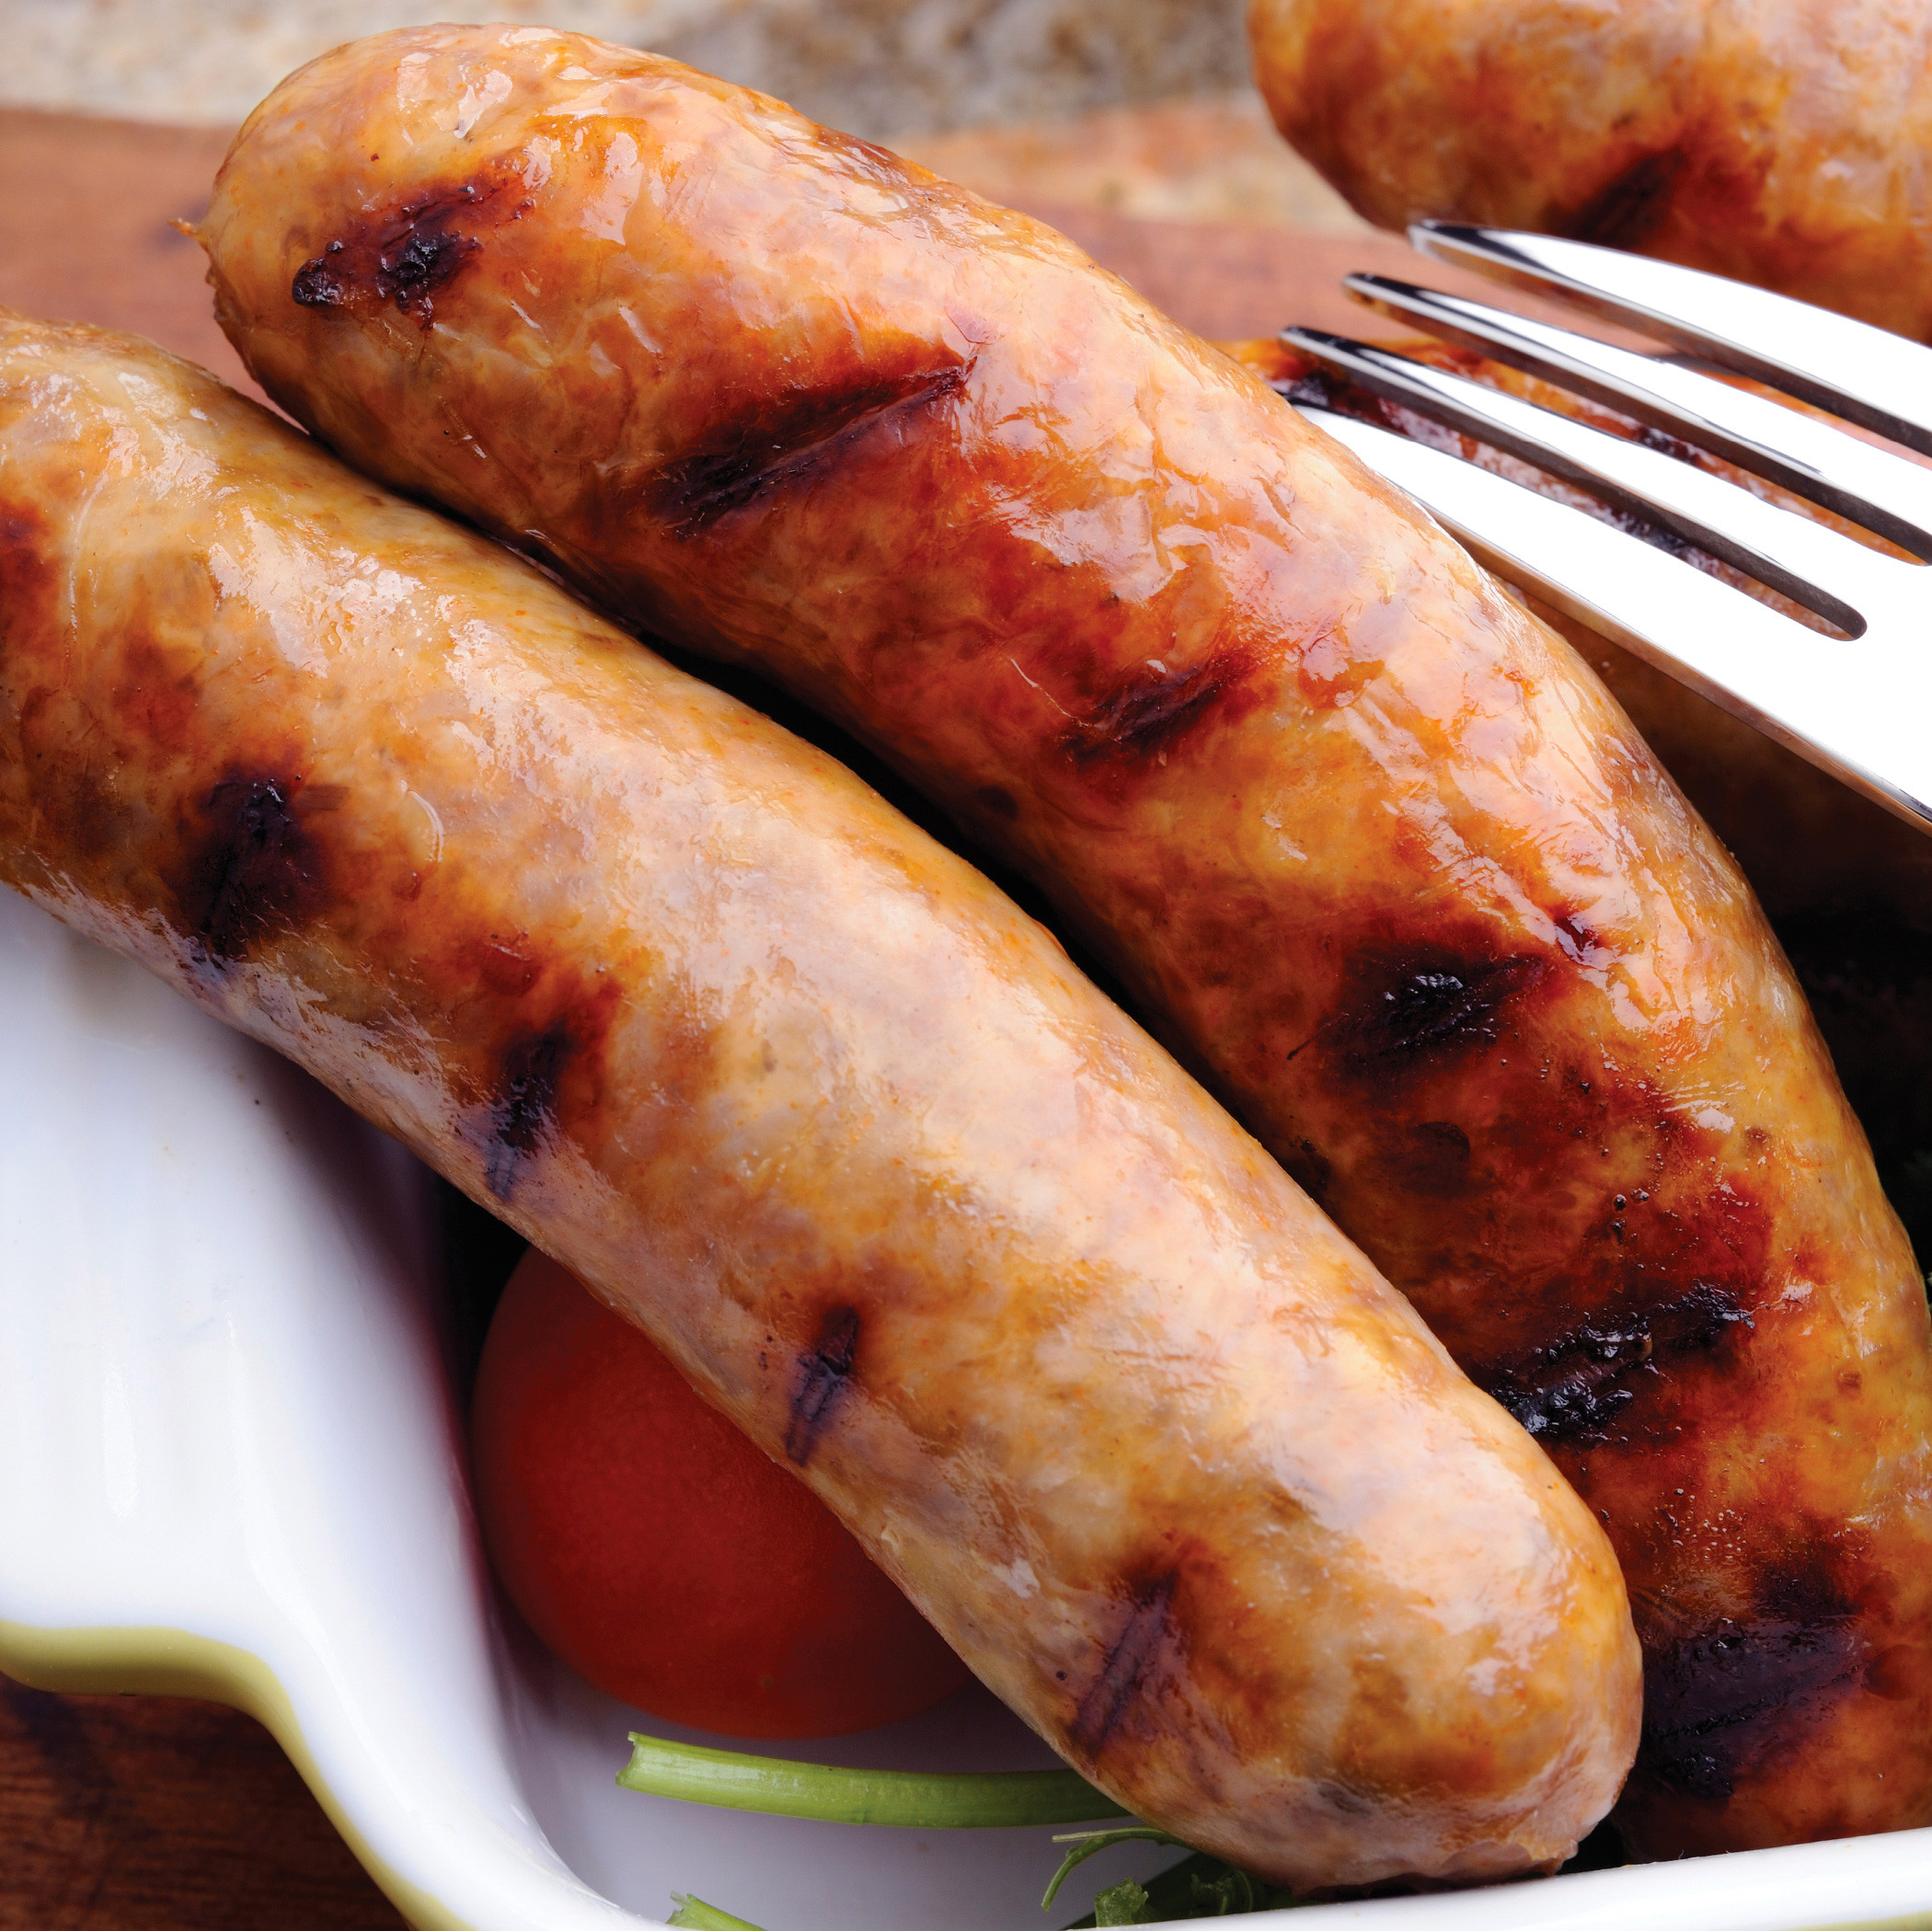 Easy Recipes Using Sweet Italian Sausage to Make at Home